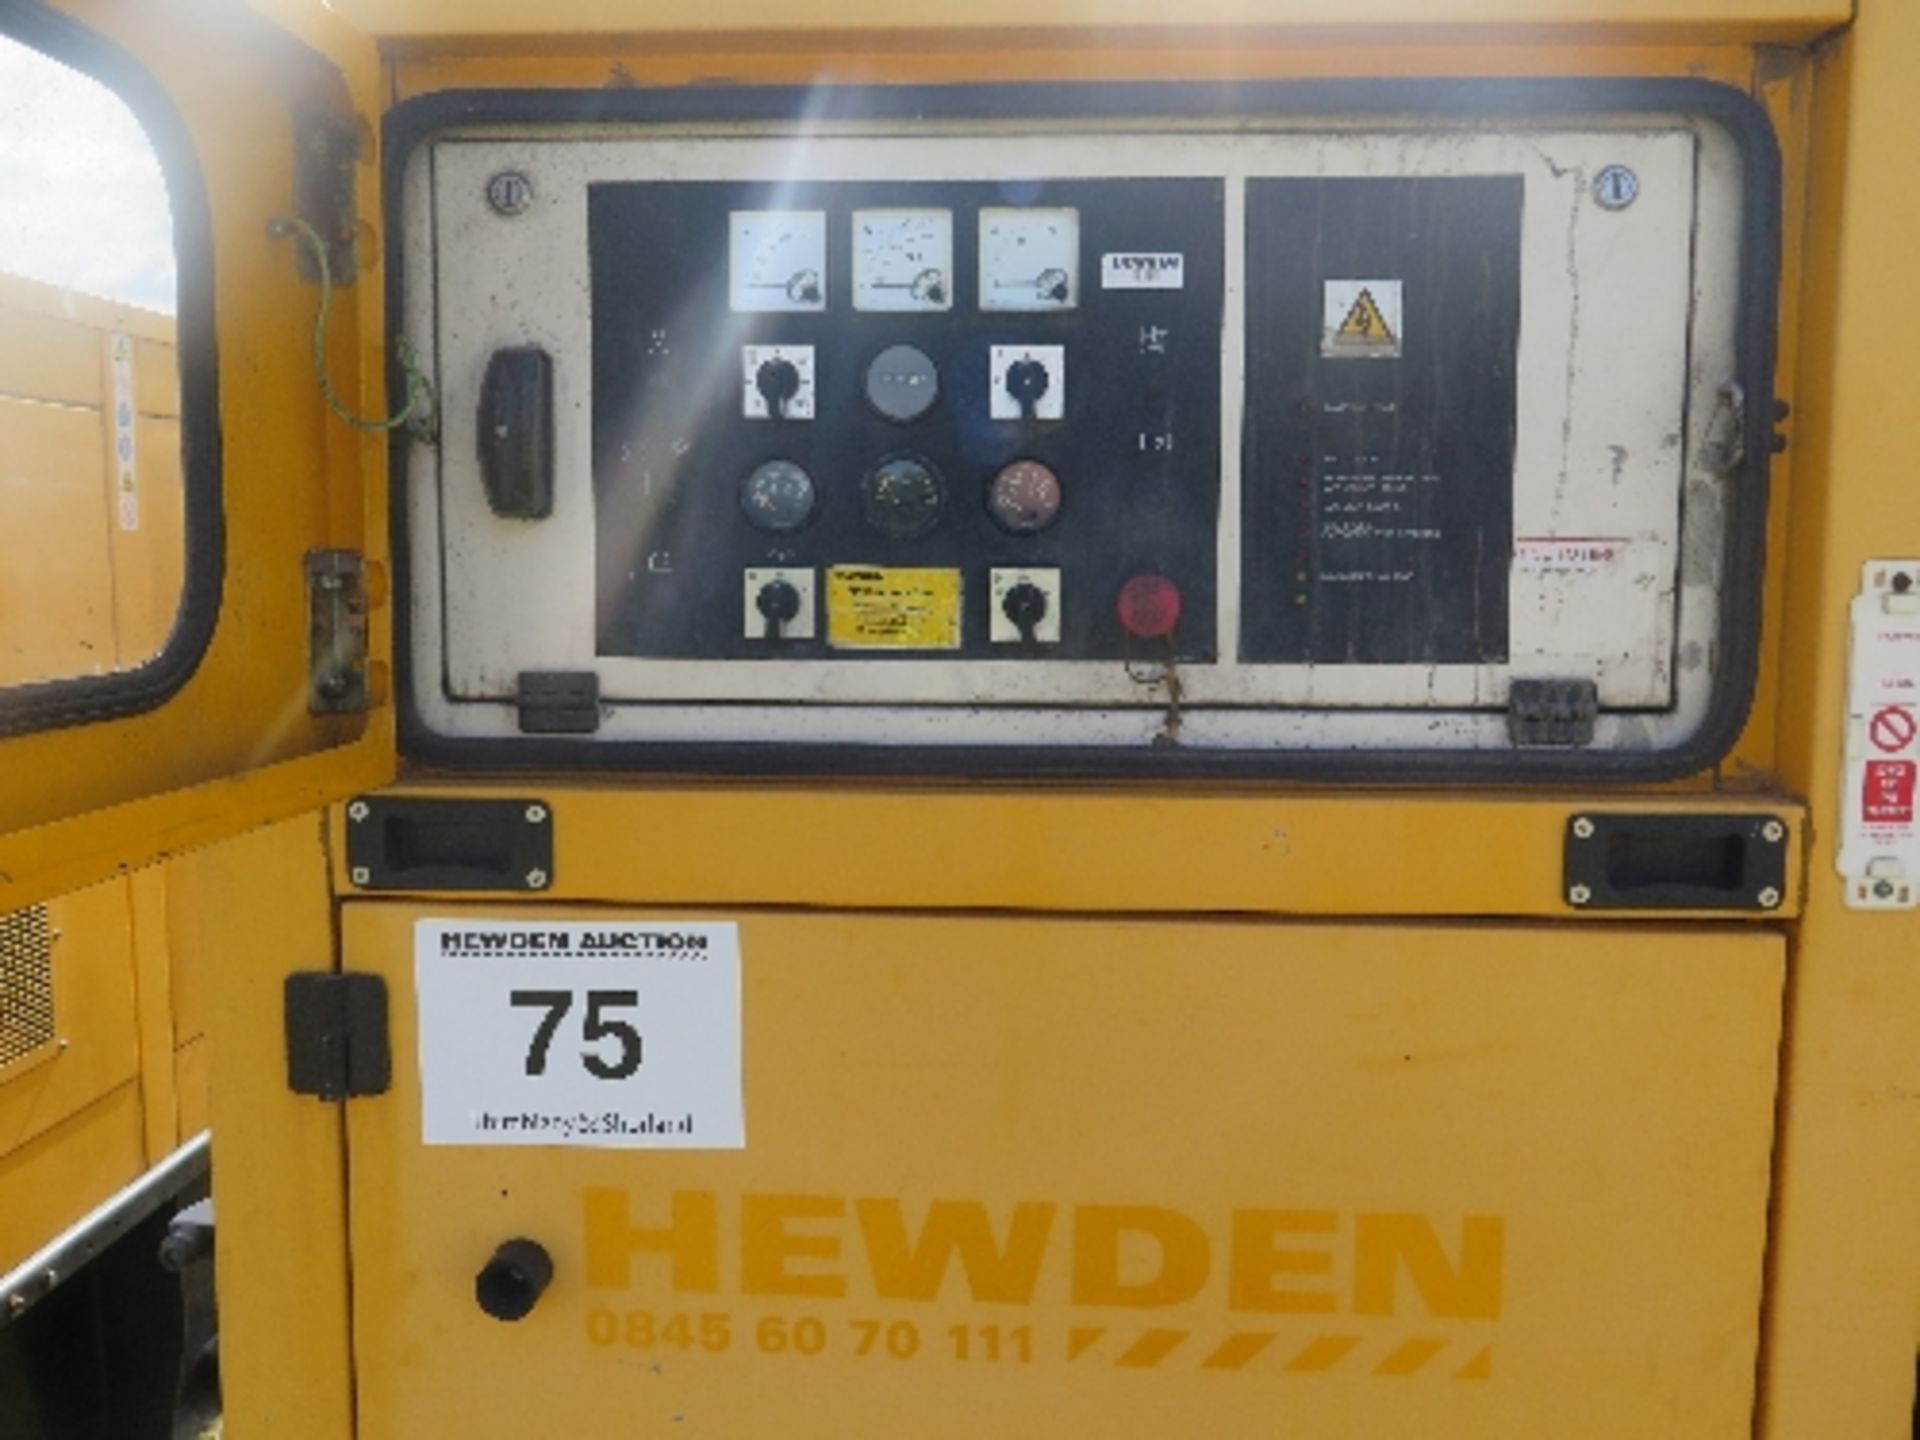 Caterpillar XQE80 generator 14819 hrs 157811
PERKINS - RUNS AND MAKES POWER
ALL LOTS are SOLD AS - Image 2 of 6